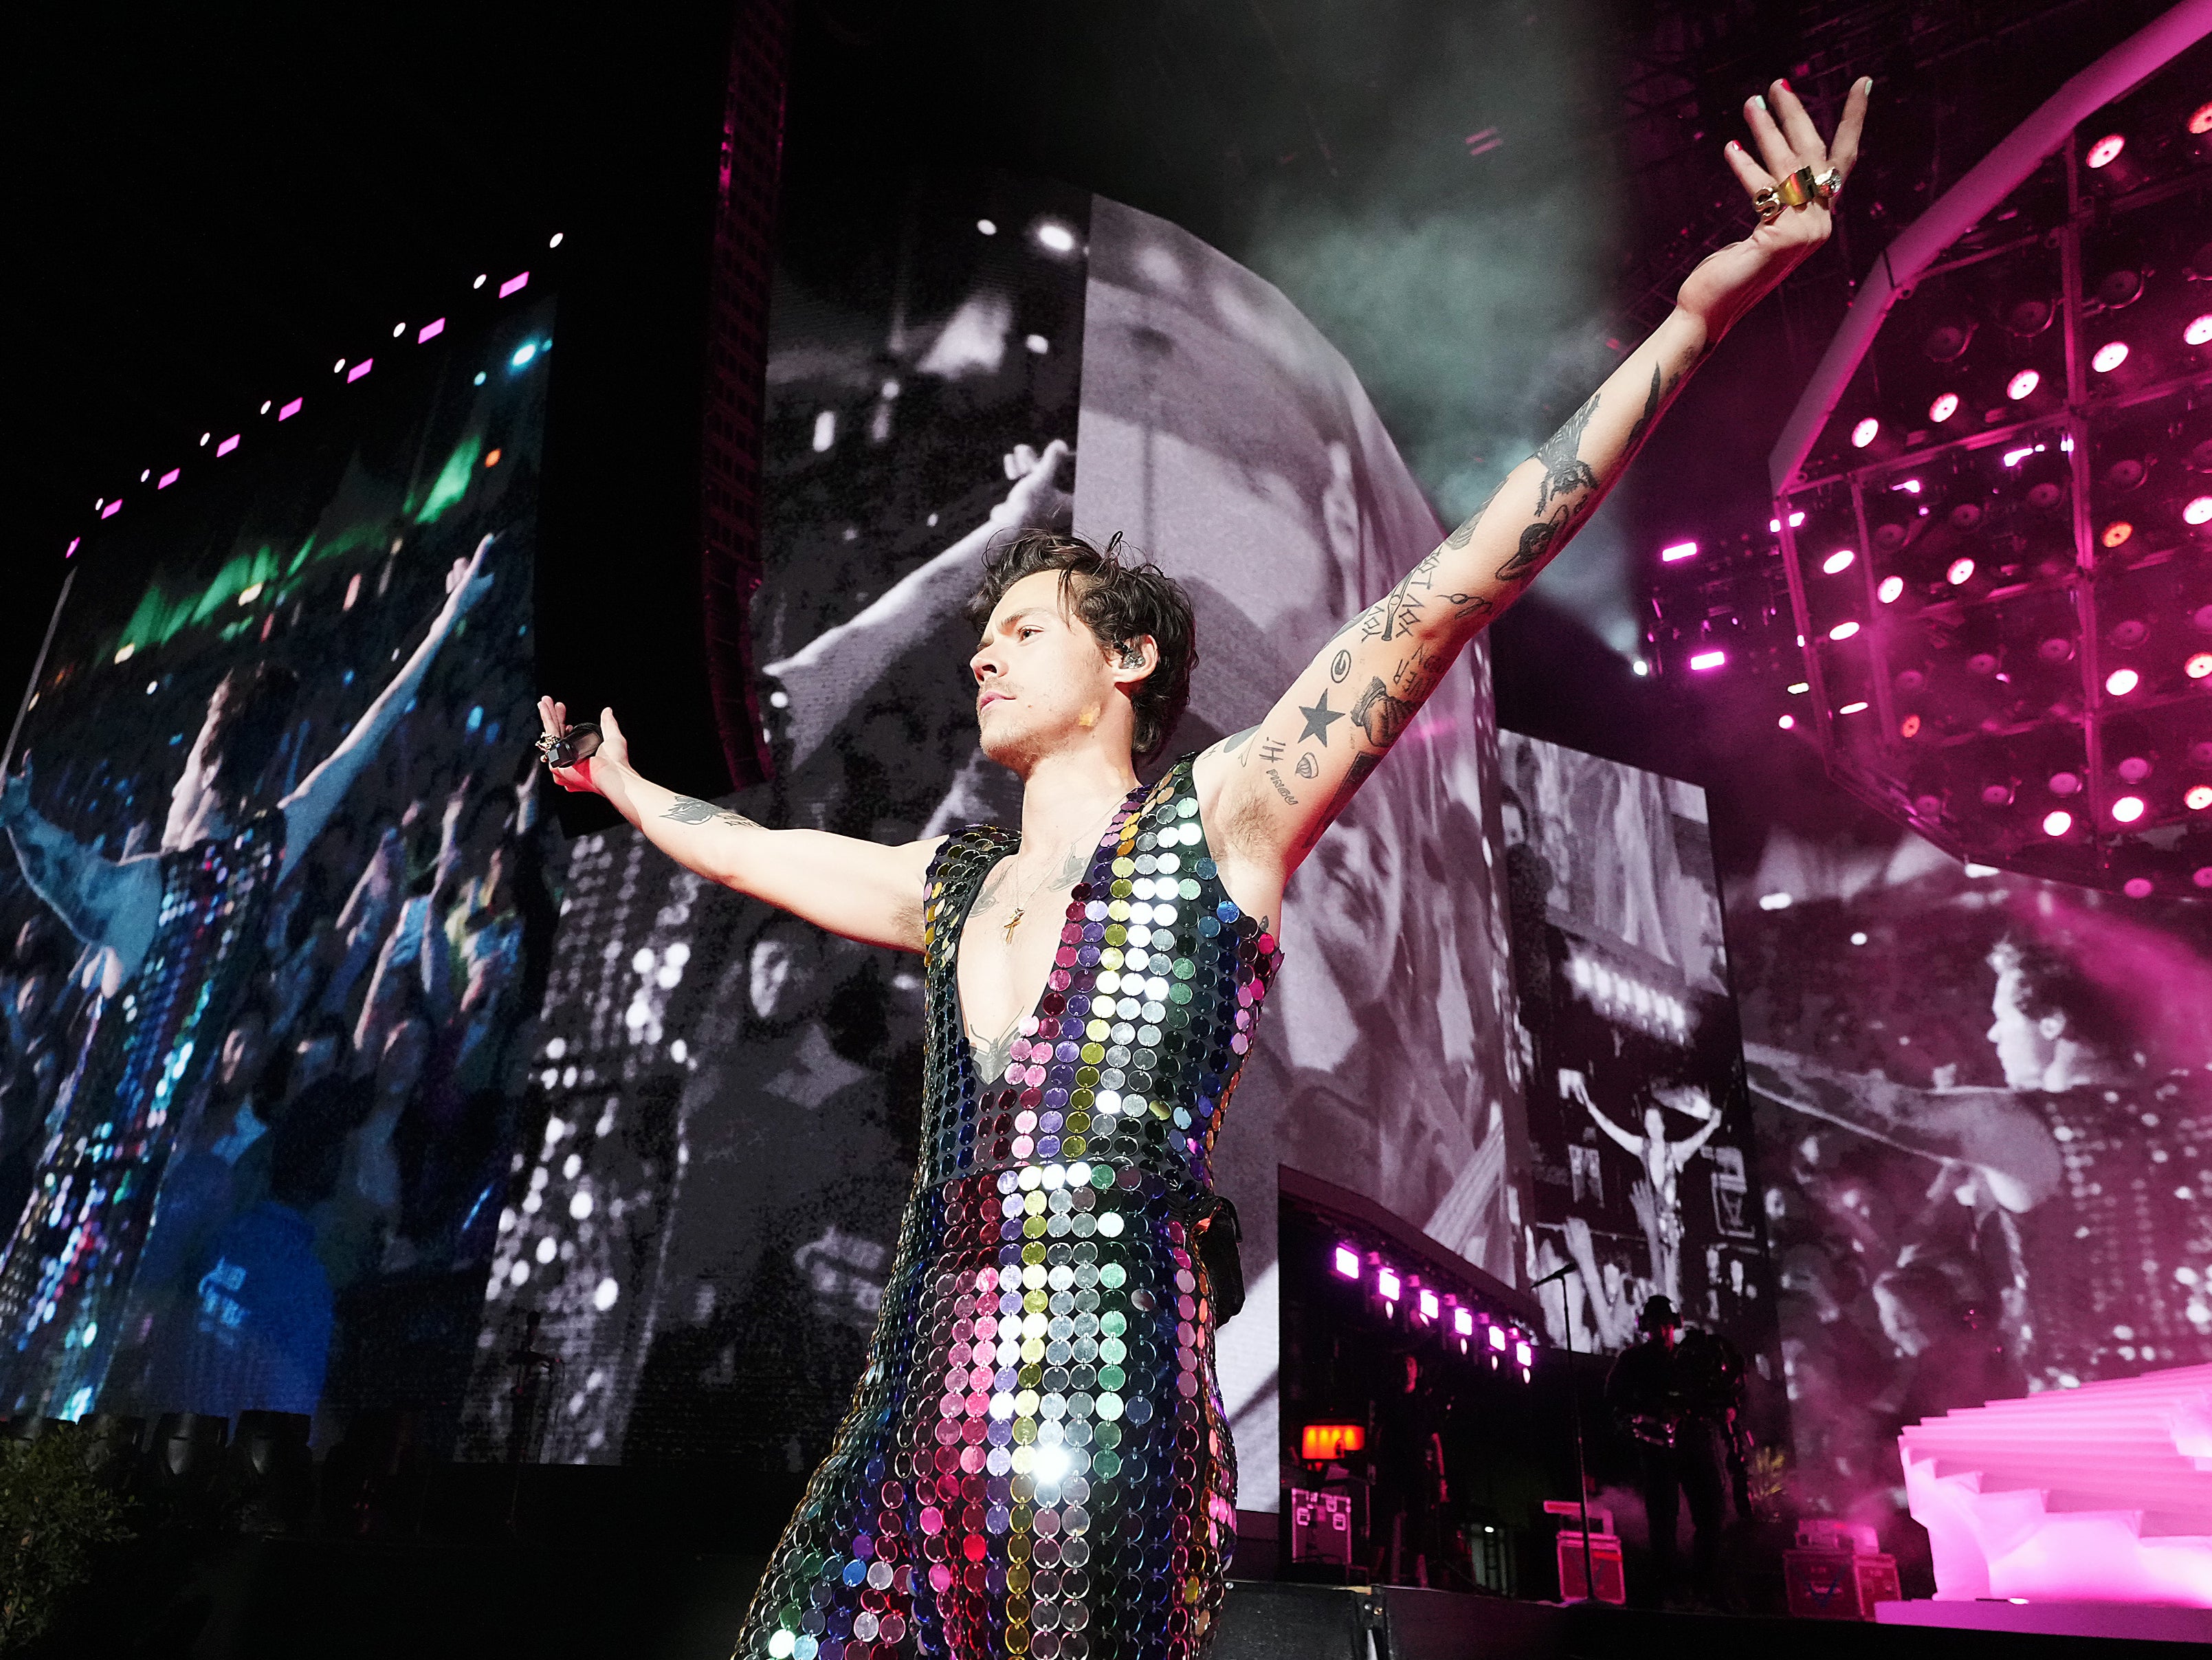 Meet the man who styles Harry Styles (sequins and all)